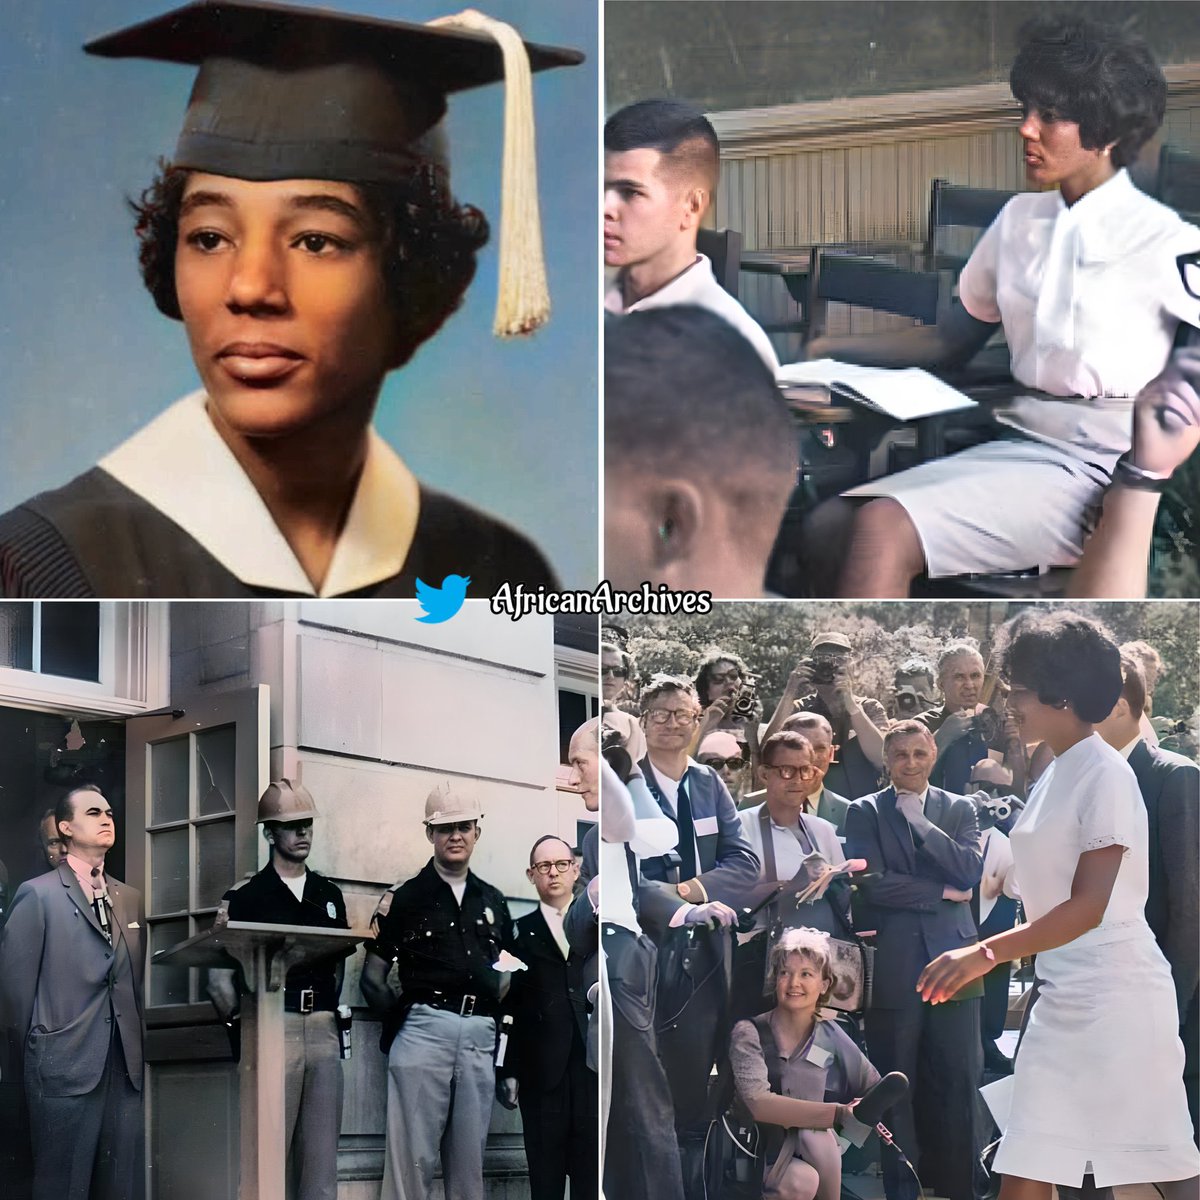 On this day in 1965, Vivian Malone became the 1st black students to graduate from the University of Alabama in it's 134 years of existence. In 1963, Alabama Governor George Wallace physically blocked Vivian and James Hood, two black students, from enrolling in the University.